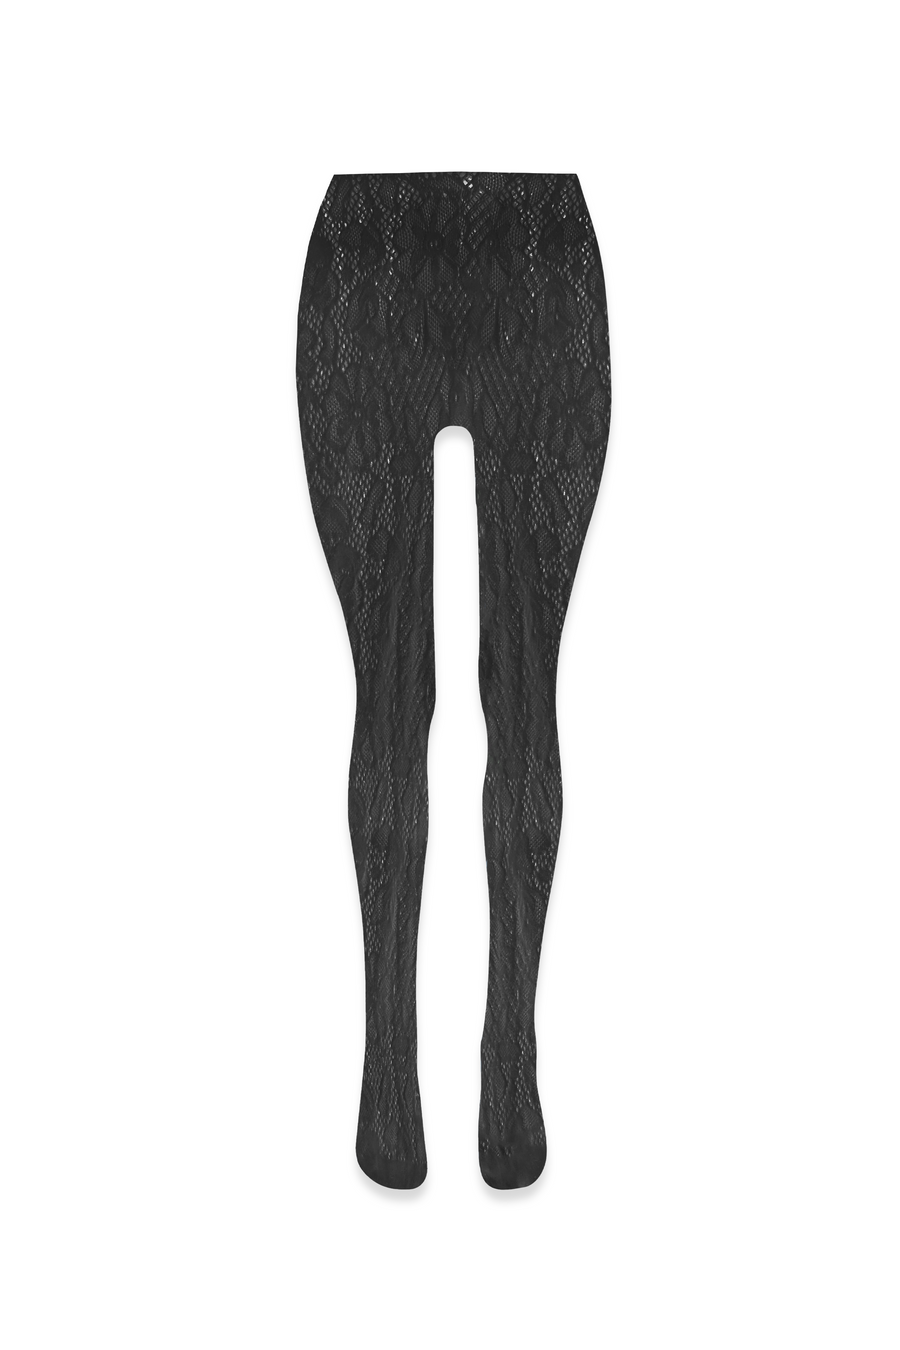 Altar Lace Tights in Black